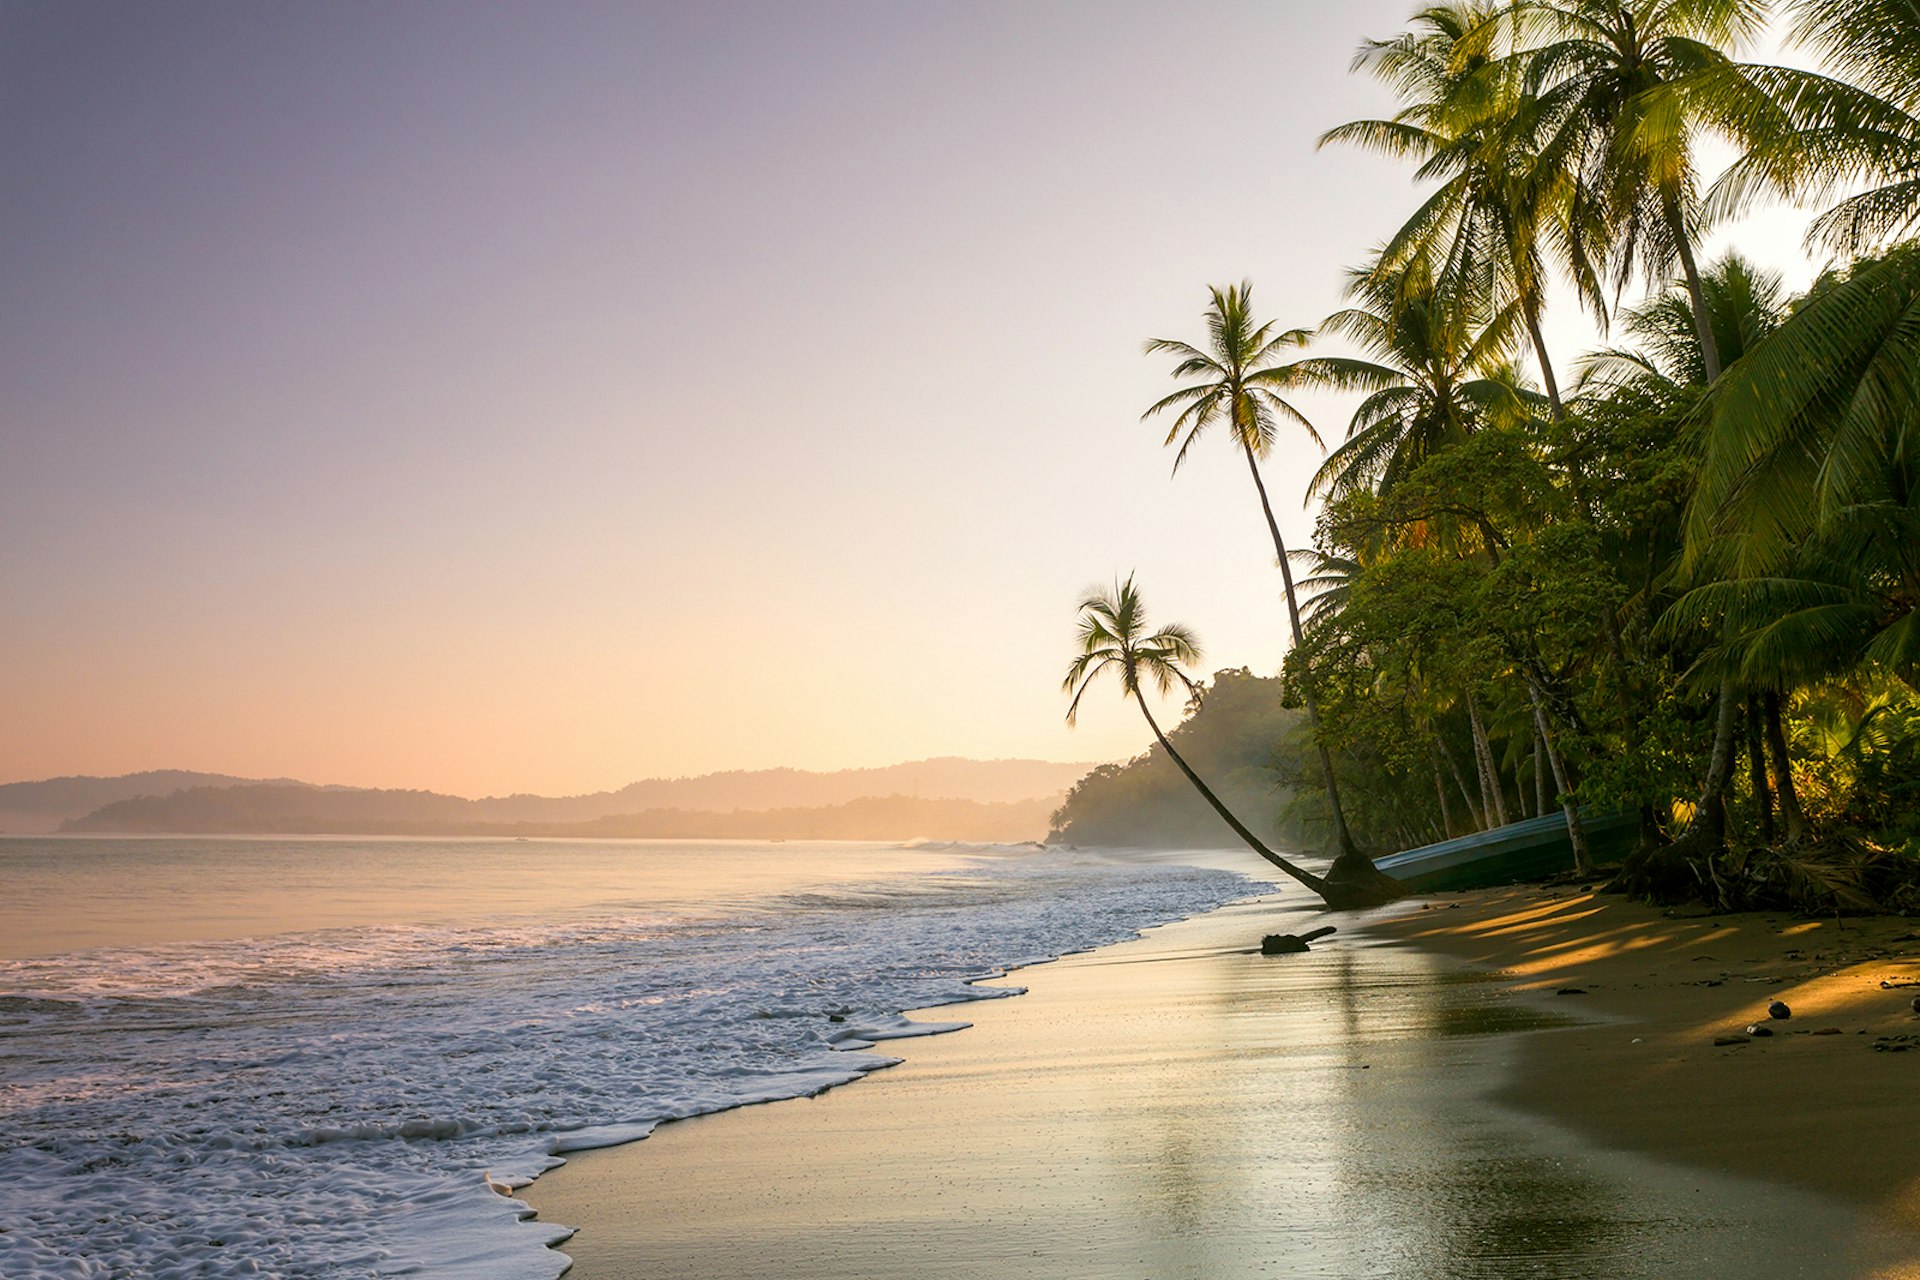 Features - Sunset on palm fringed beach, Costa Rica